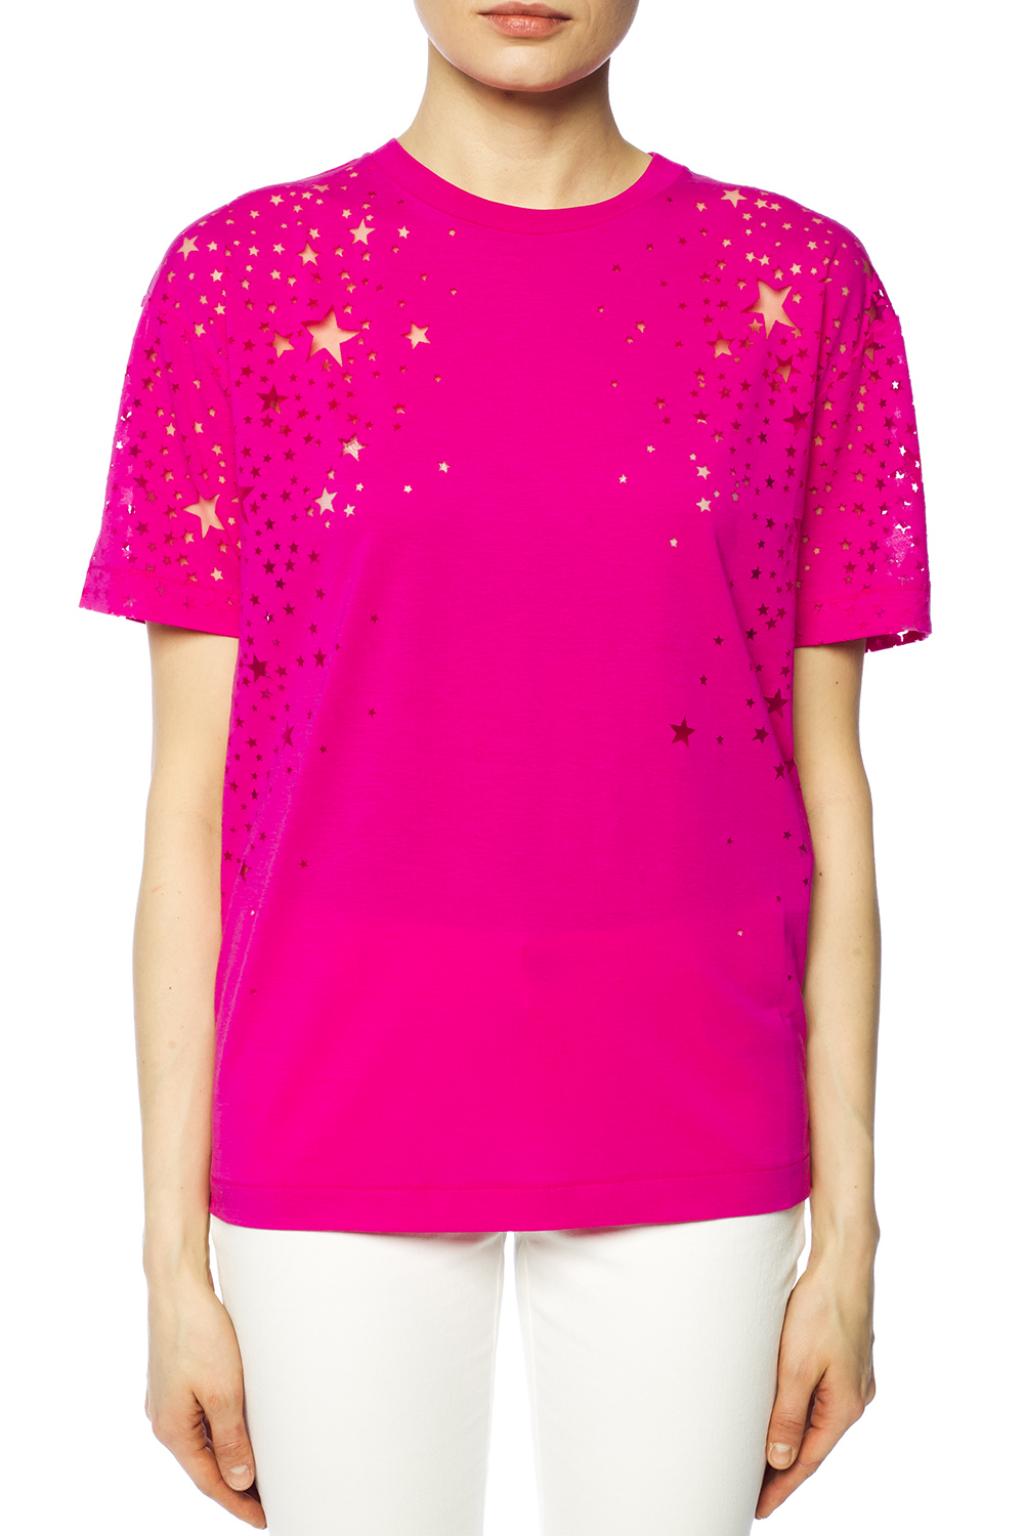 Stella McCartney T-shirt with cut-out stars | Women's Clothing